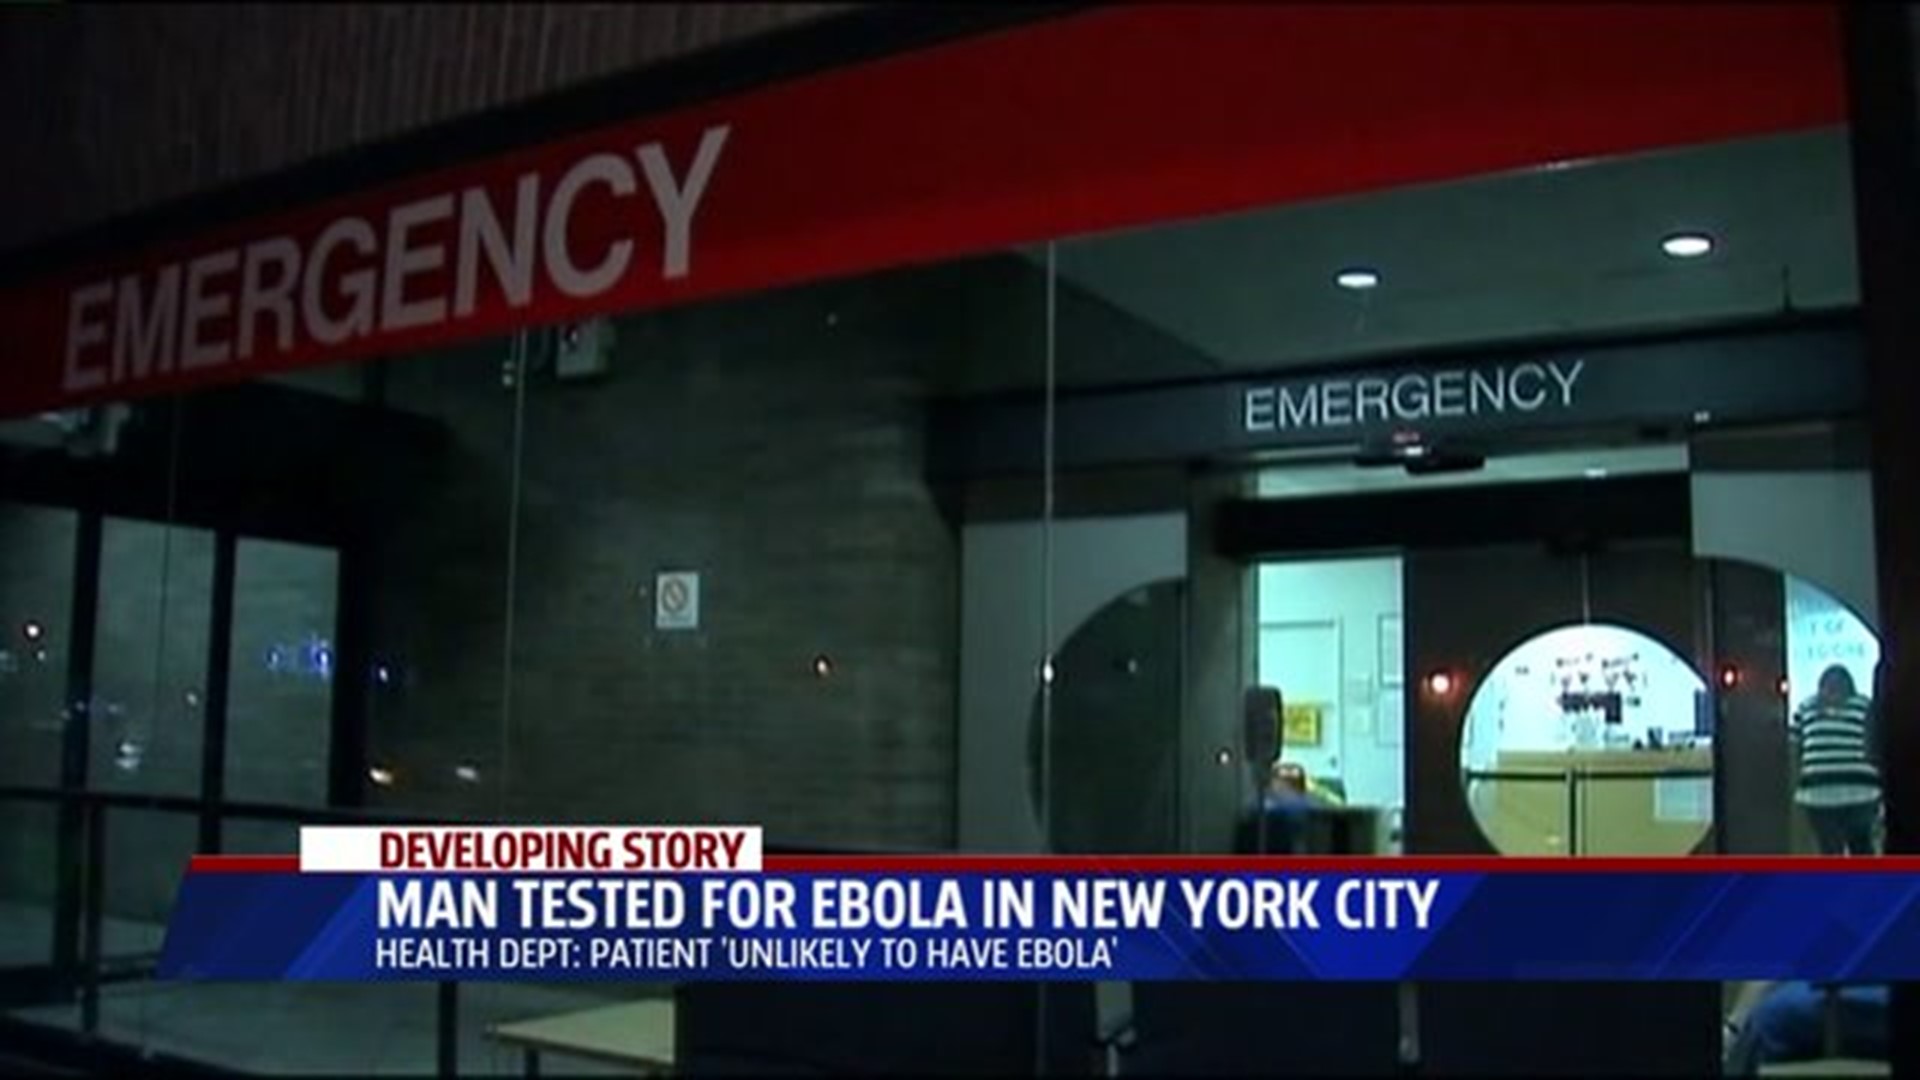 Man Tested For Ebola In New York